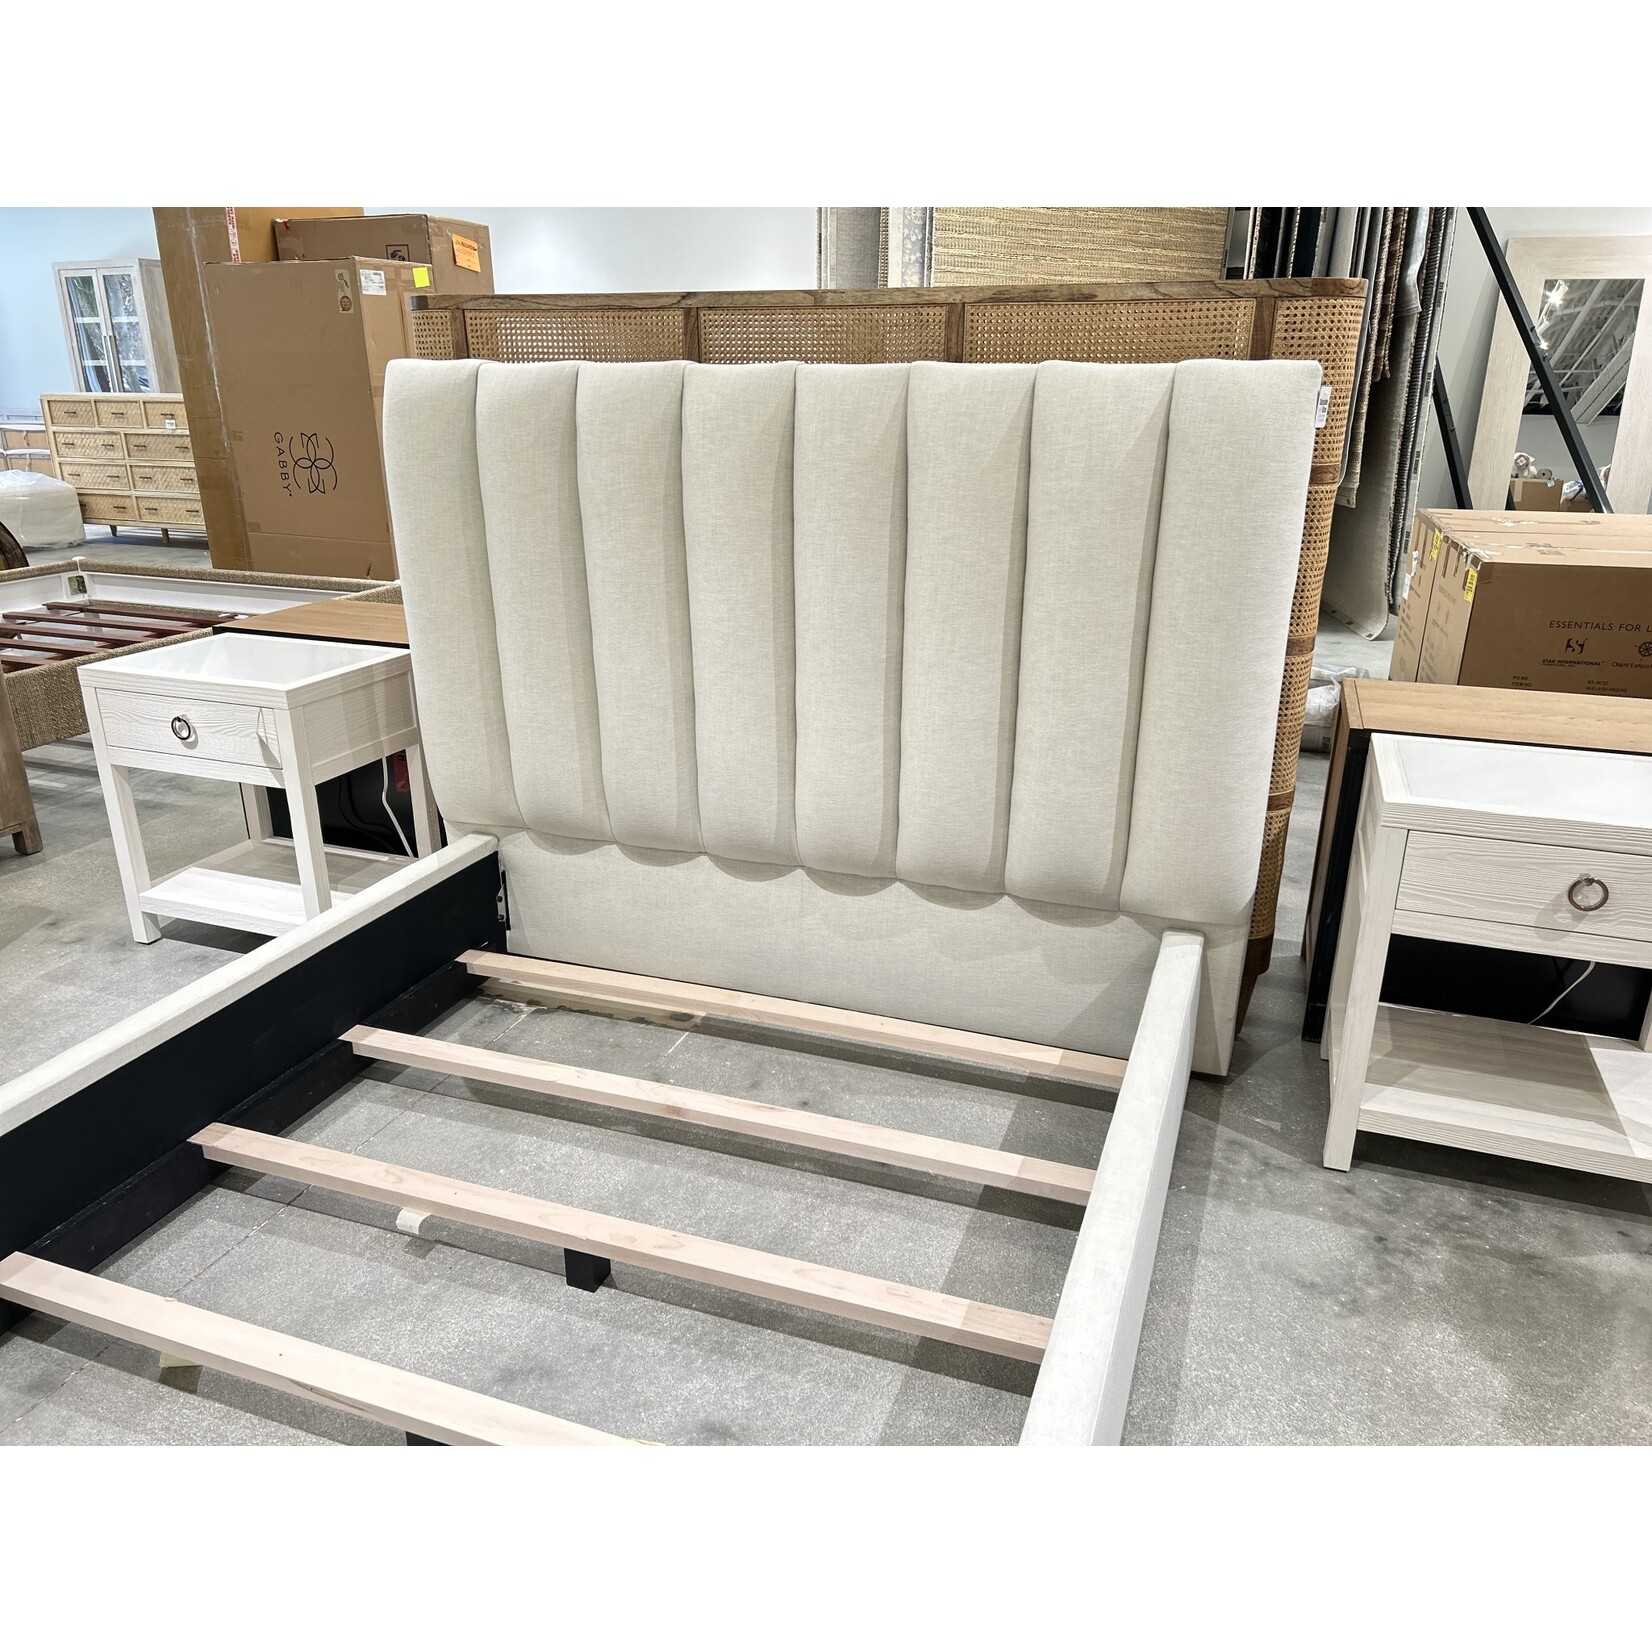 Outside The Box 79x94x55 Hunter Channeled Queen Upholstered Bed In Slipaway Cream